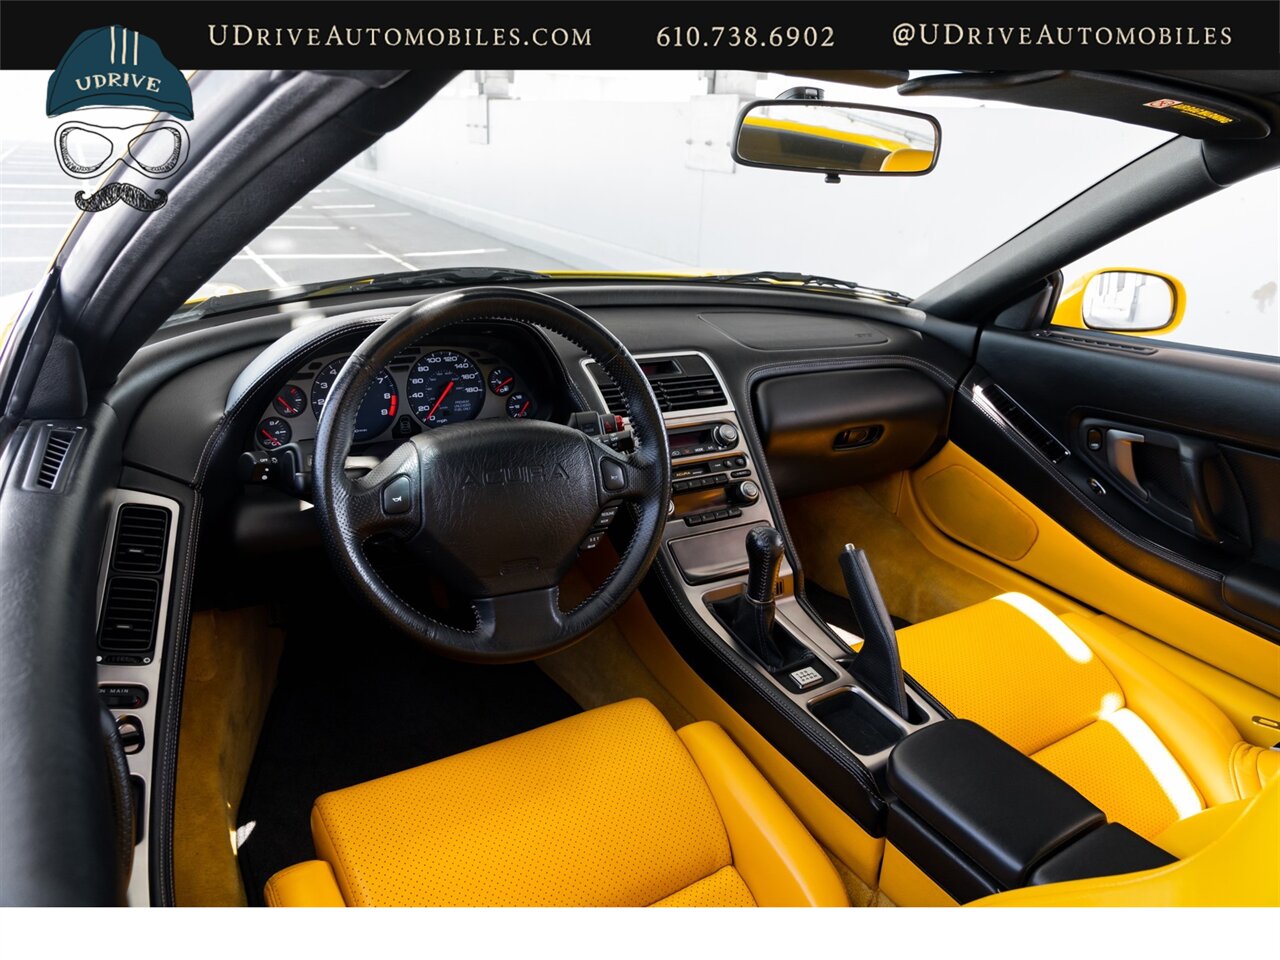 2003 Acura NSX NSX-T  Spa Yellow over Yellow Lthr 1 of 13 Produced - Photo 36 - West Chester, PA 19382